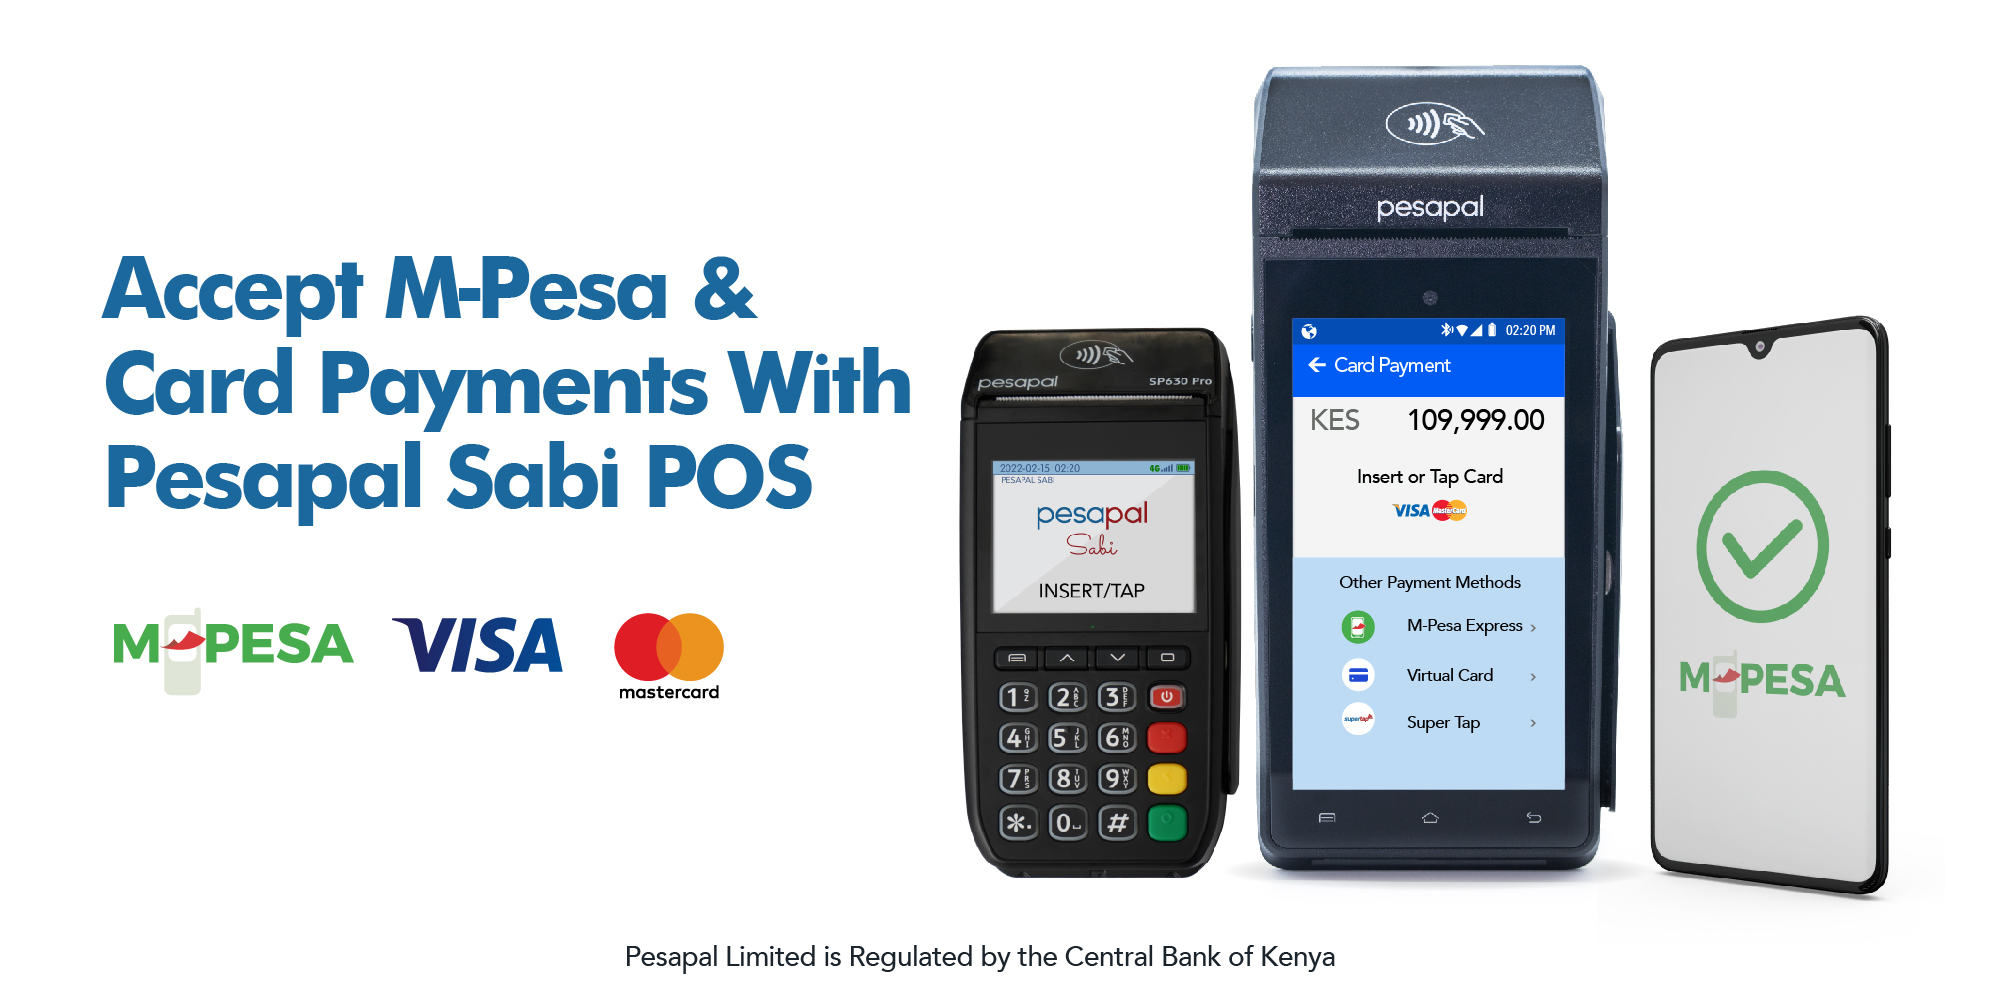 Overview of the 2022 card & Mobile Money Payments Landscape in Kenya